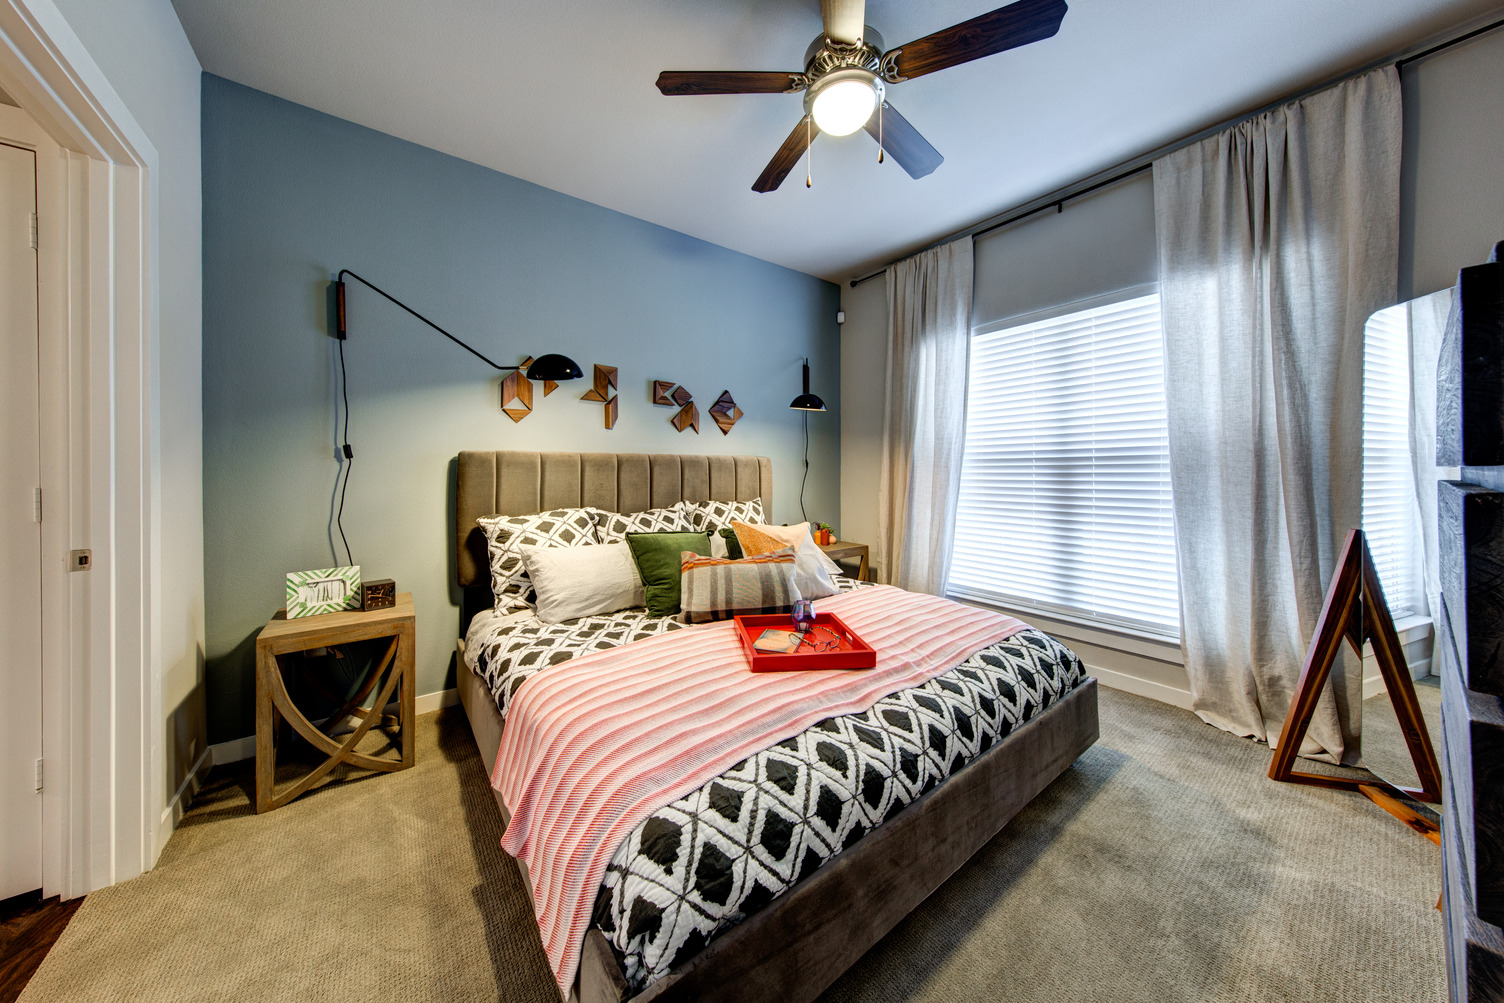 Model apartment bedroom with queen bed, ceiling fan, and carpeting